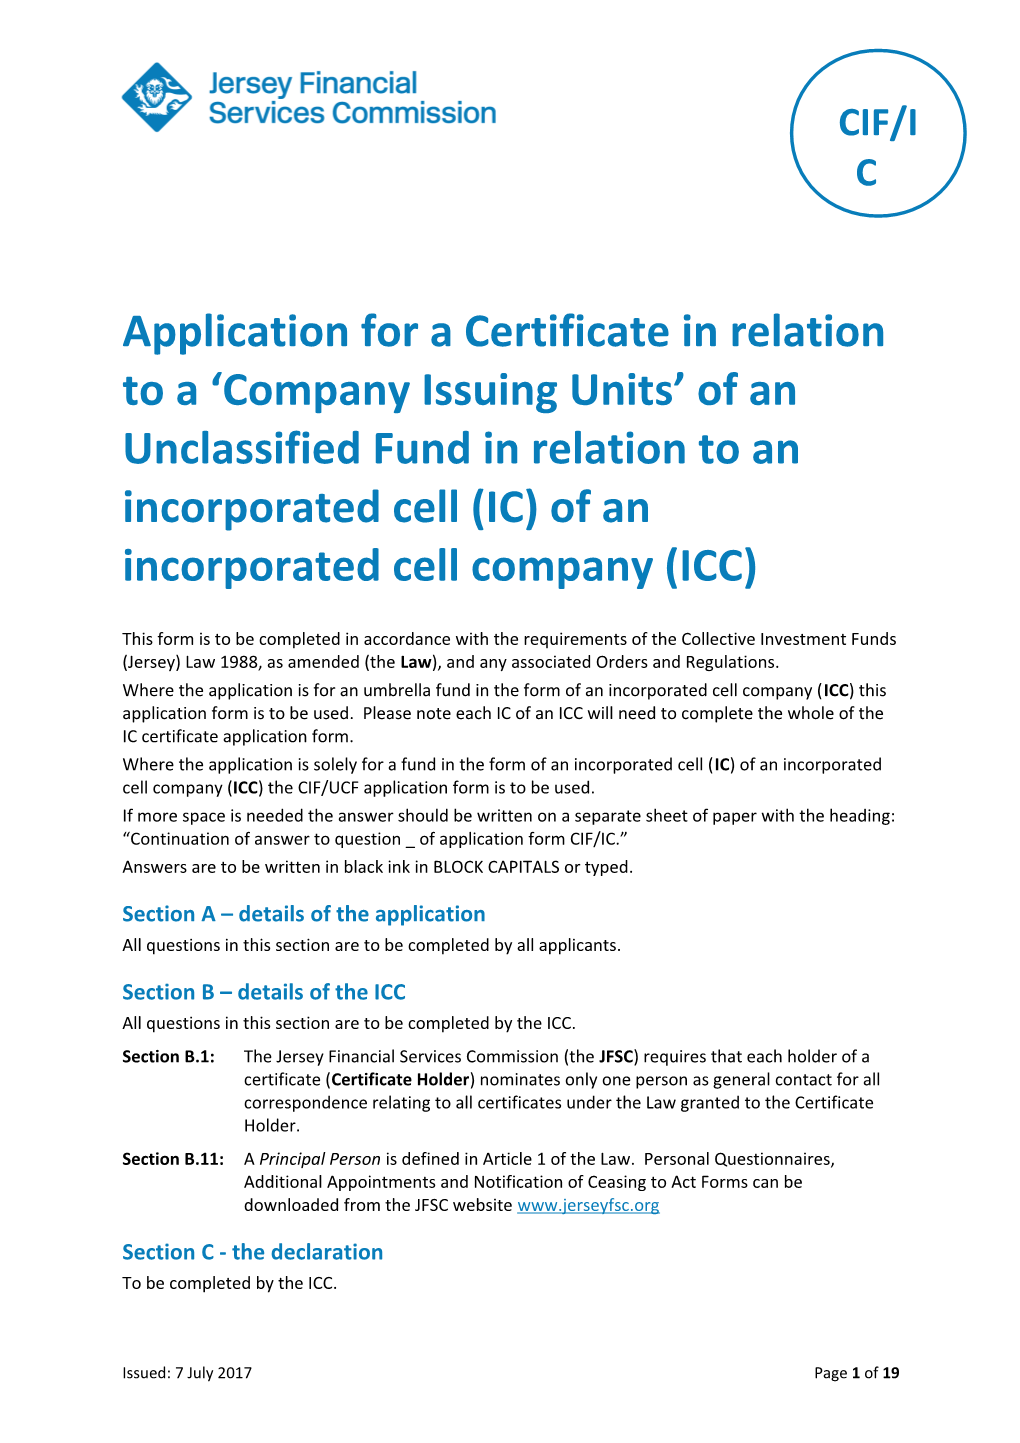 Application for a Certificate in Relation to a Company Issuing Units of an Unclassified